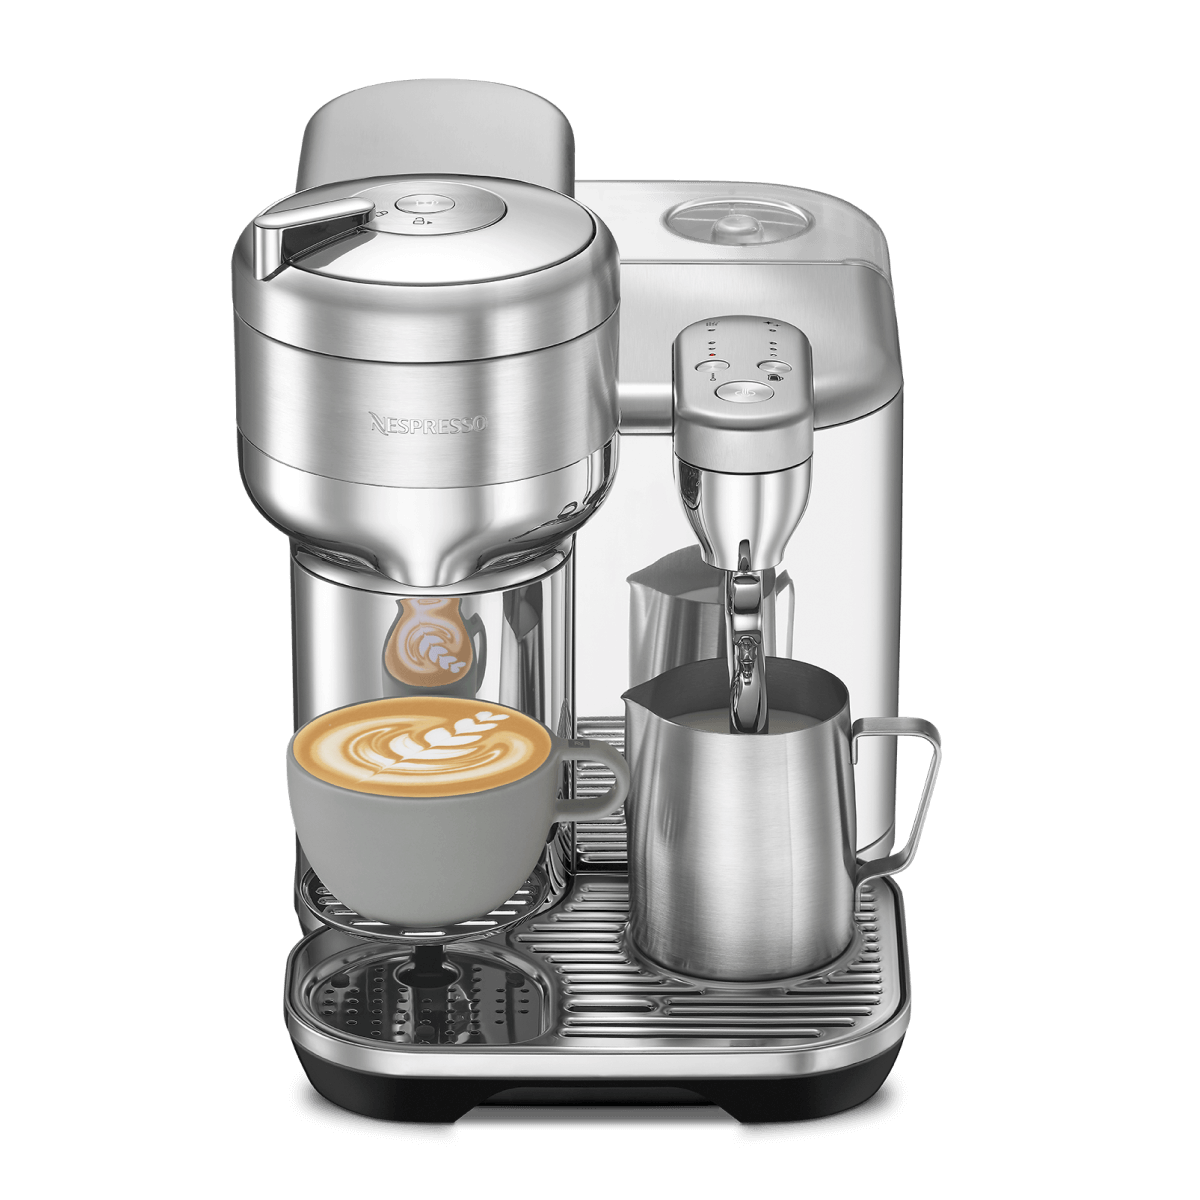 https://www.nespresso.com/shared_res/agility/global/machines/vl/sku-main-info-product/vertuo-creatista_stainlesssteel_front-coffee-milk-nespresso_2x.png